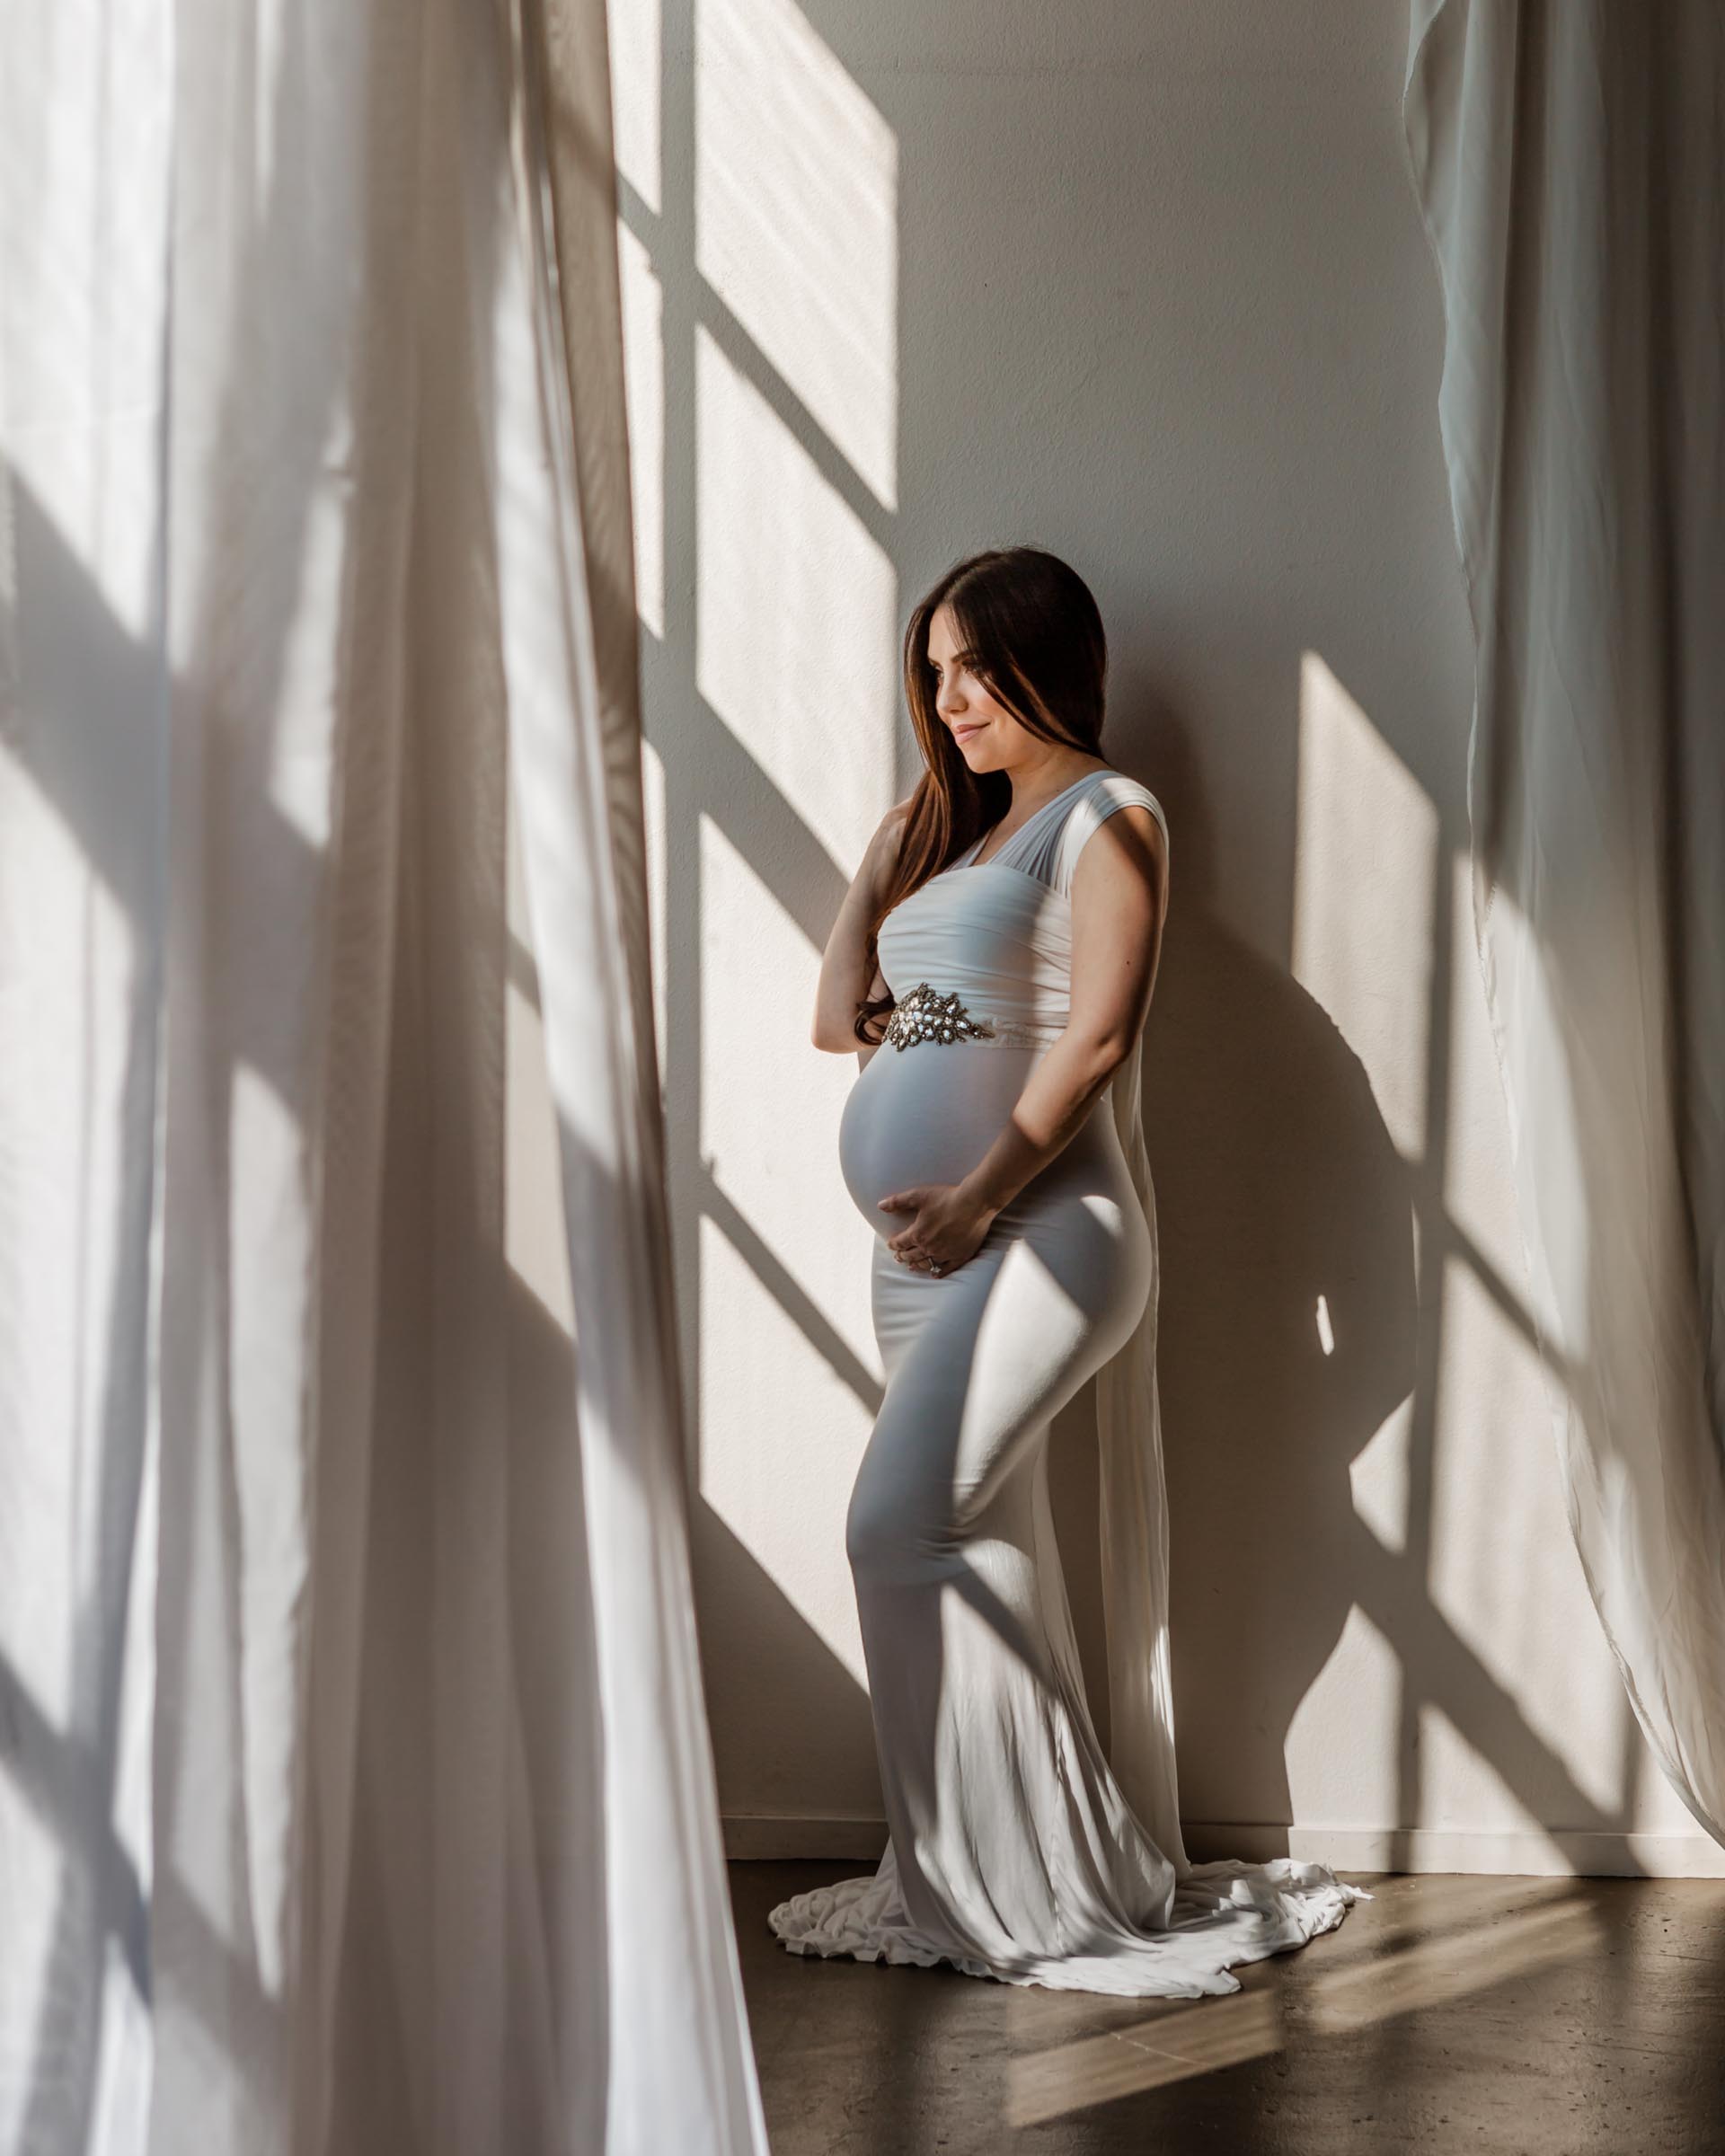 6 Simple Steps to Wearing Non Maternity Clothes During Pregnancy